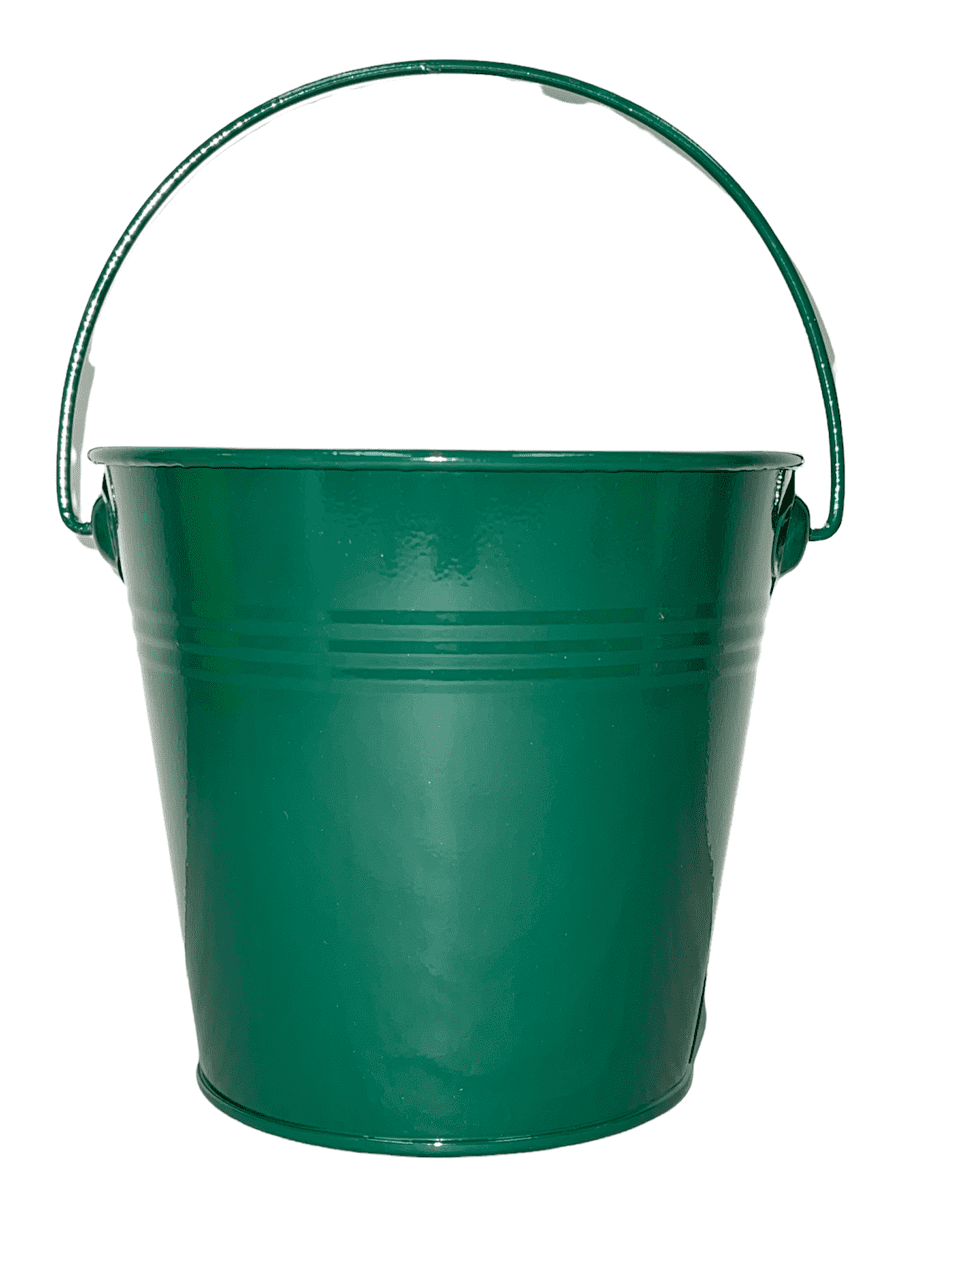 12pcs Metal Bucket With Handle Colorful Metal Bucket Colorful Zinc Plated  Bucket Beach Small Metal Bucket Mini Toy Bucket Green Plant Potted Bucket Co